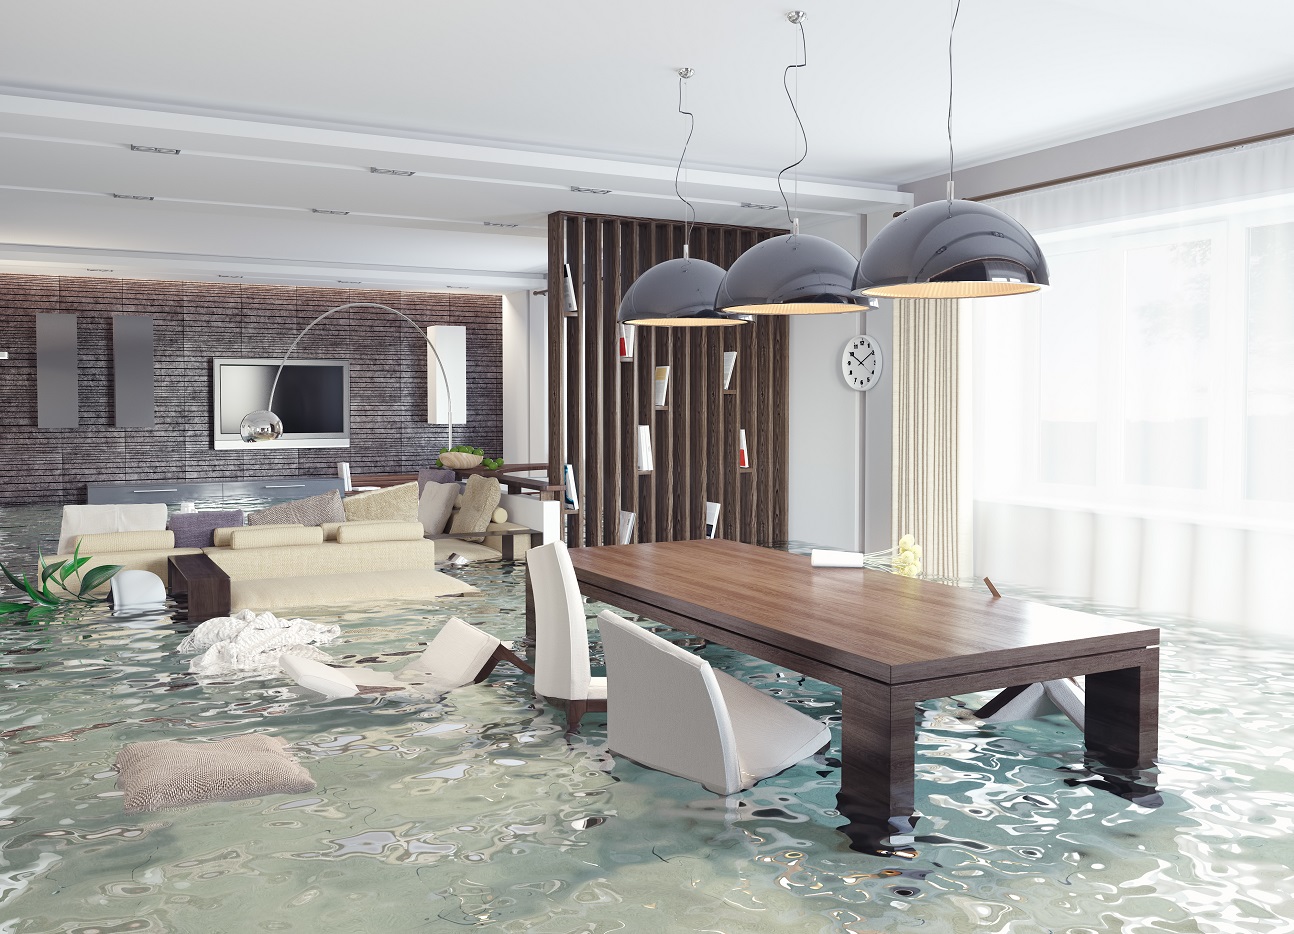 What to do if your house floods - Emergency Plumber London